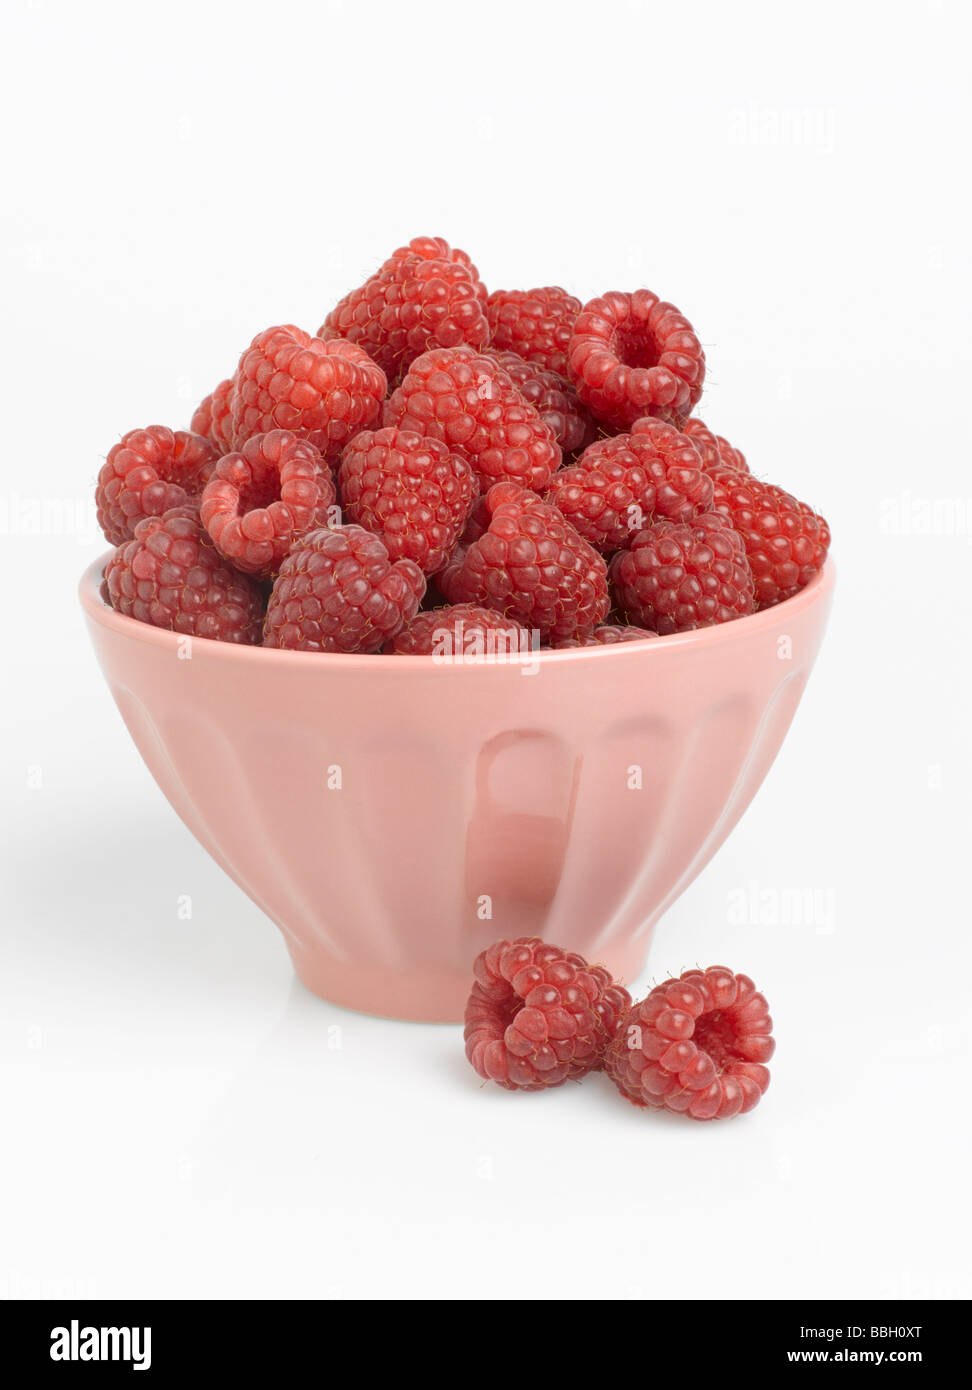 Bowl of Red Raspberries on white background Stock Photo